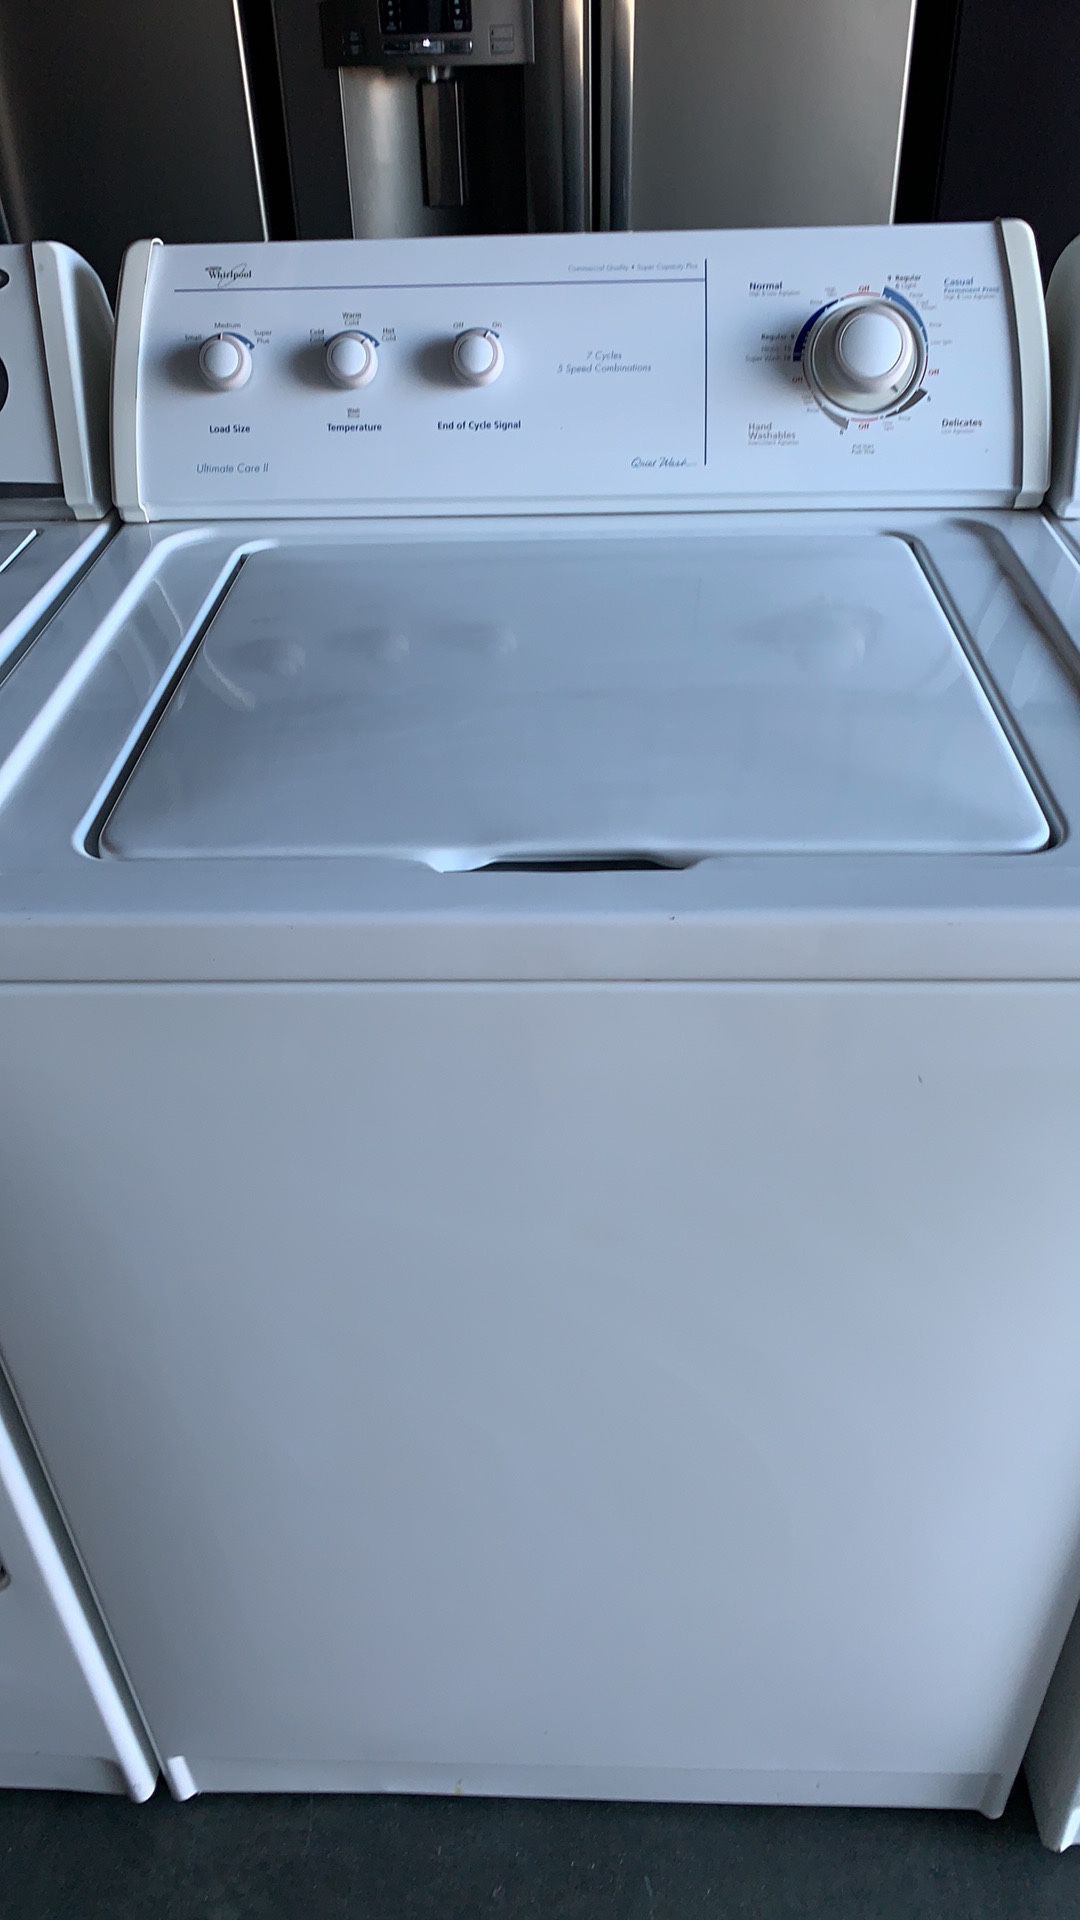 Whirlpool washer top load